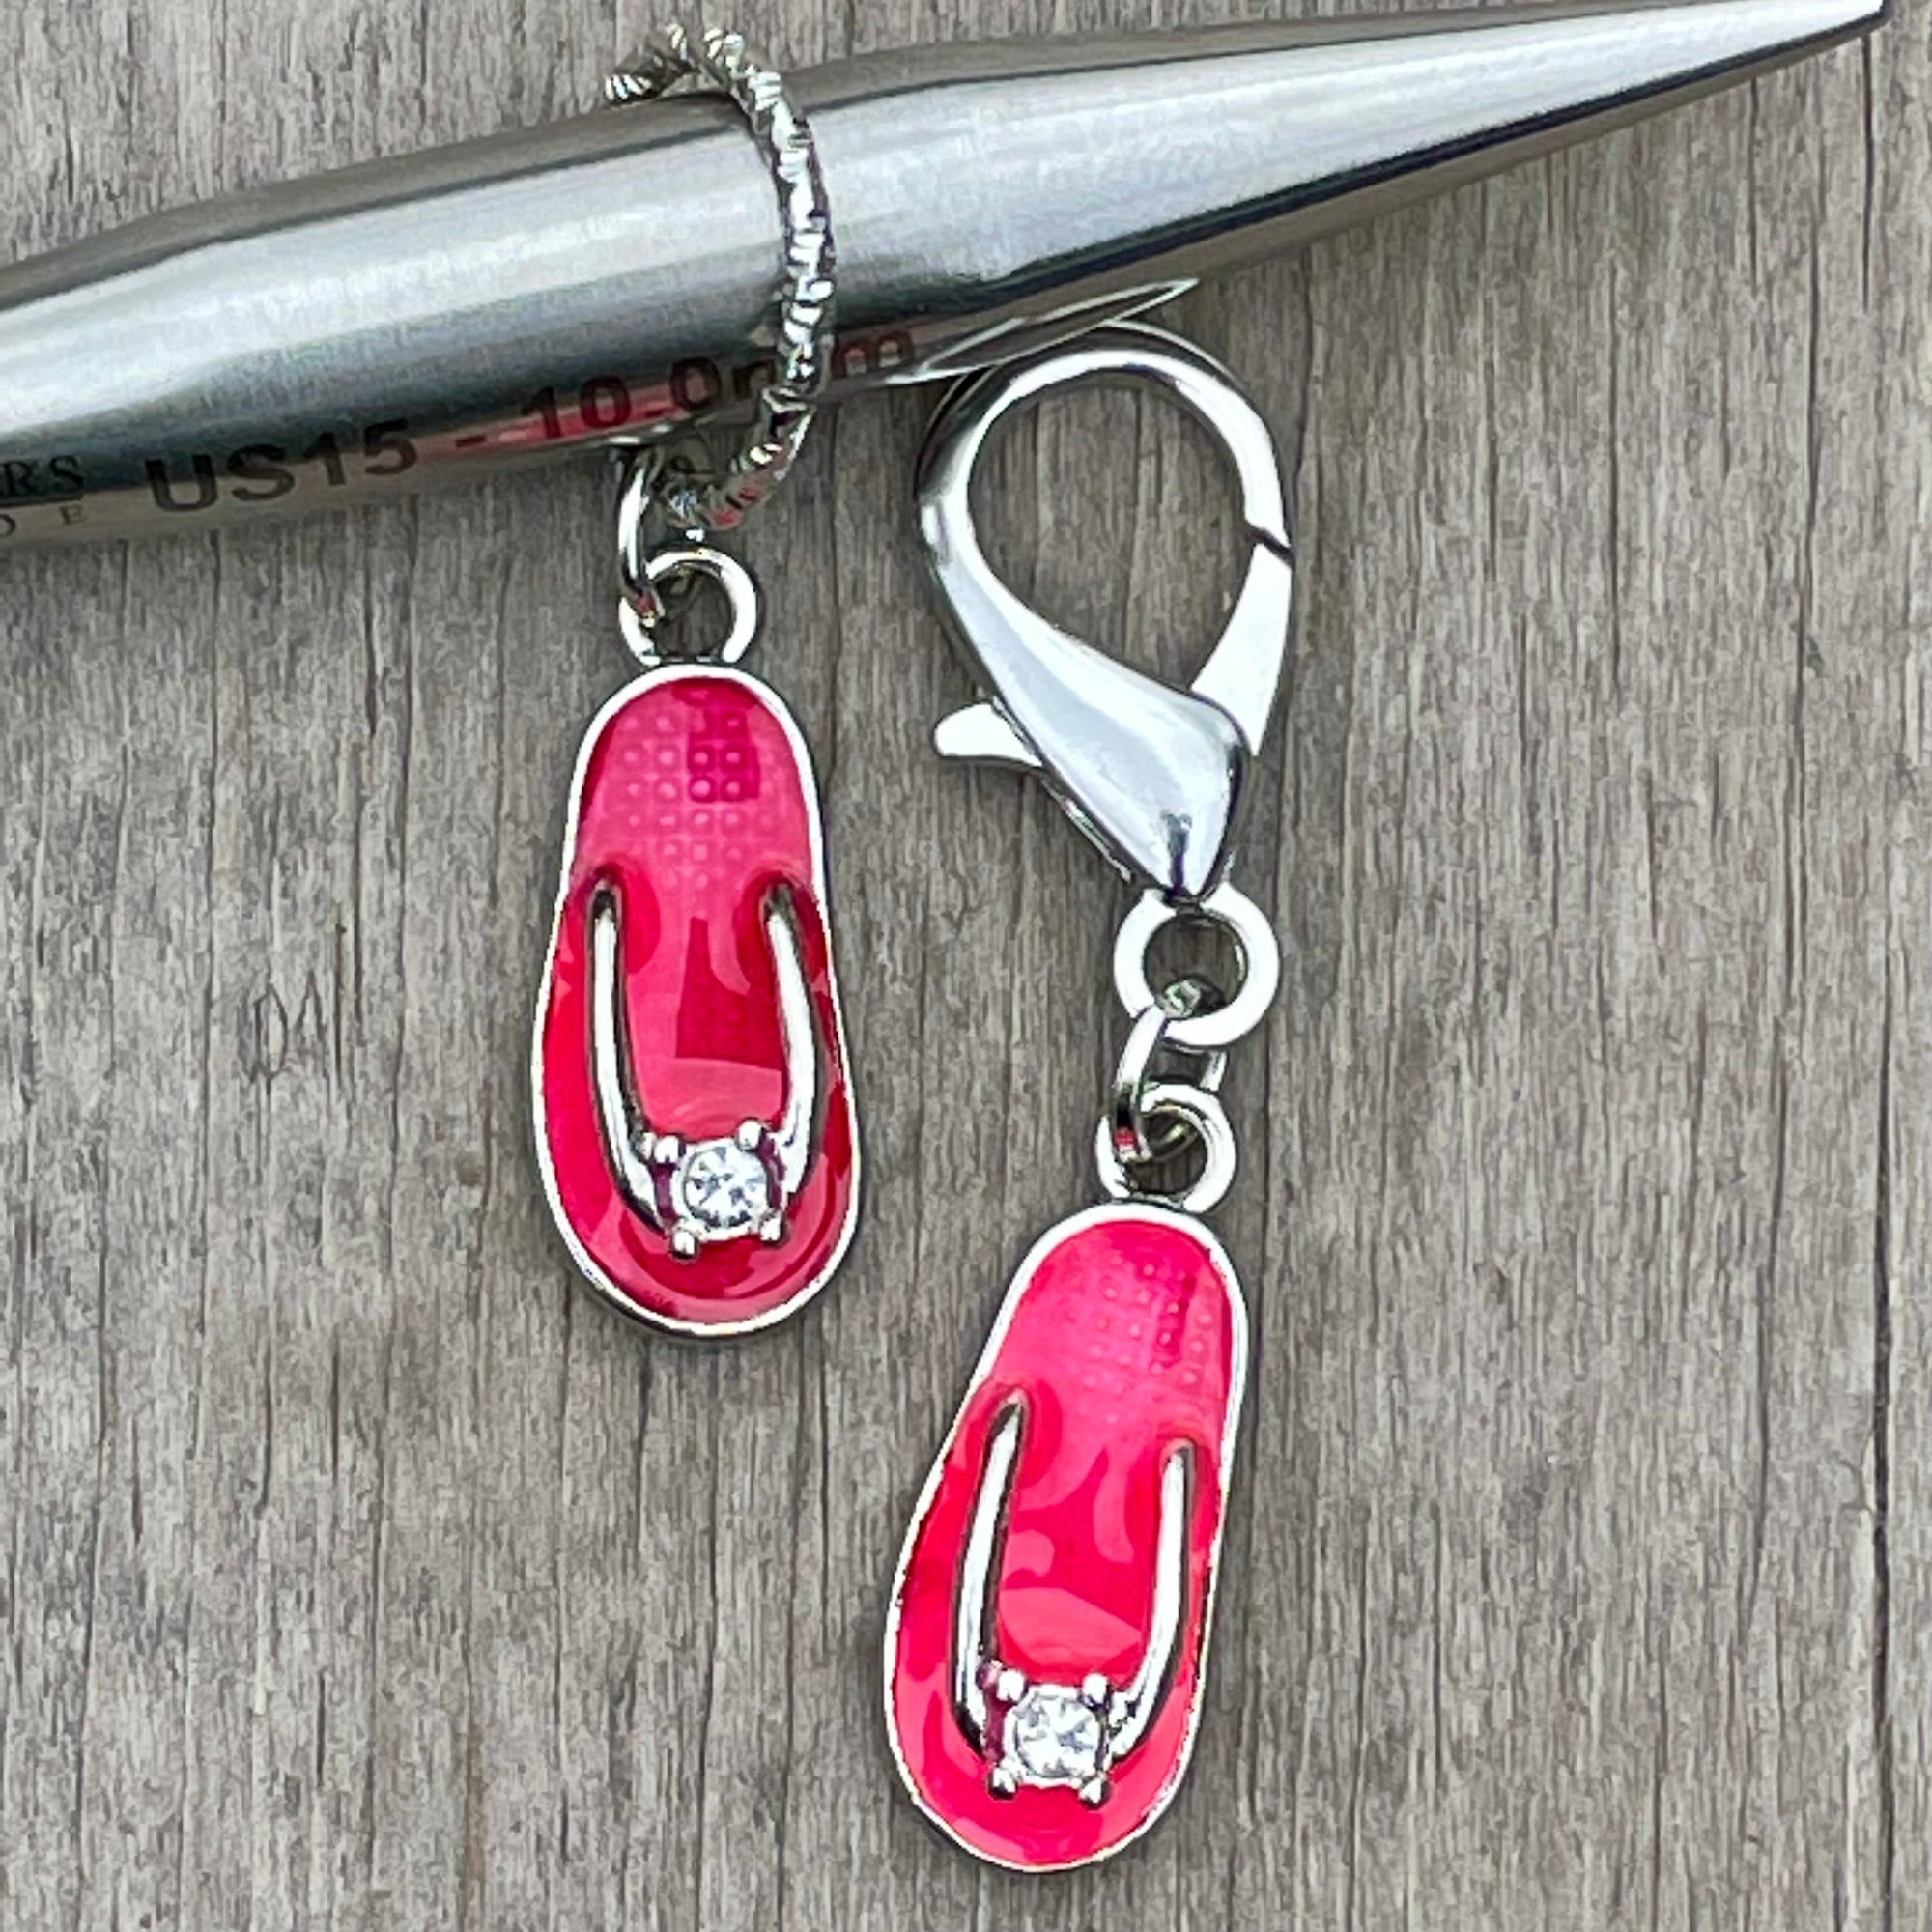 Southpaw Stitch Markers | Flip Flop Bling